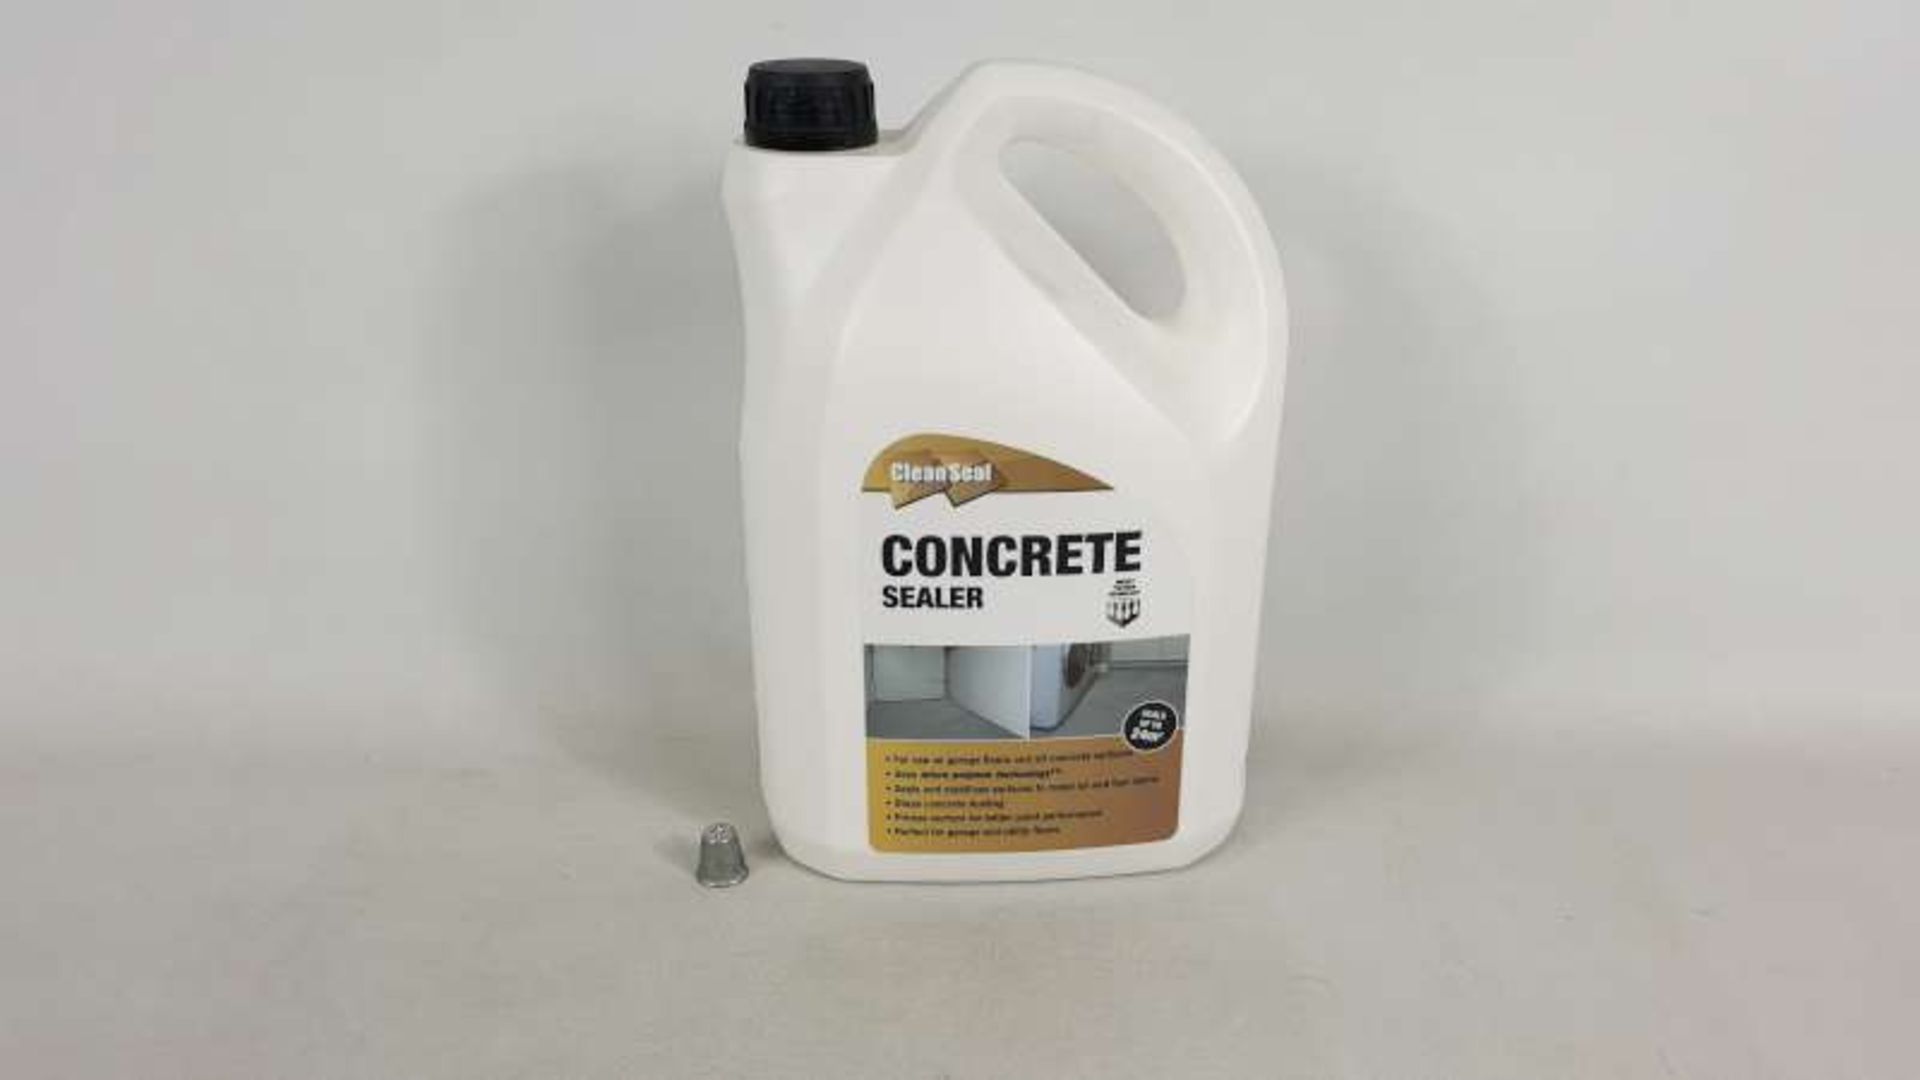 20 X BRAND NEW 4 LITRE BOTTLES OF CLEAN SEAL CONCRETE SEALER IN 5 BOXES